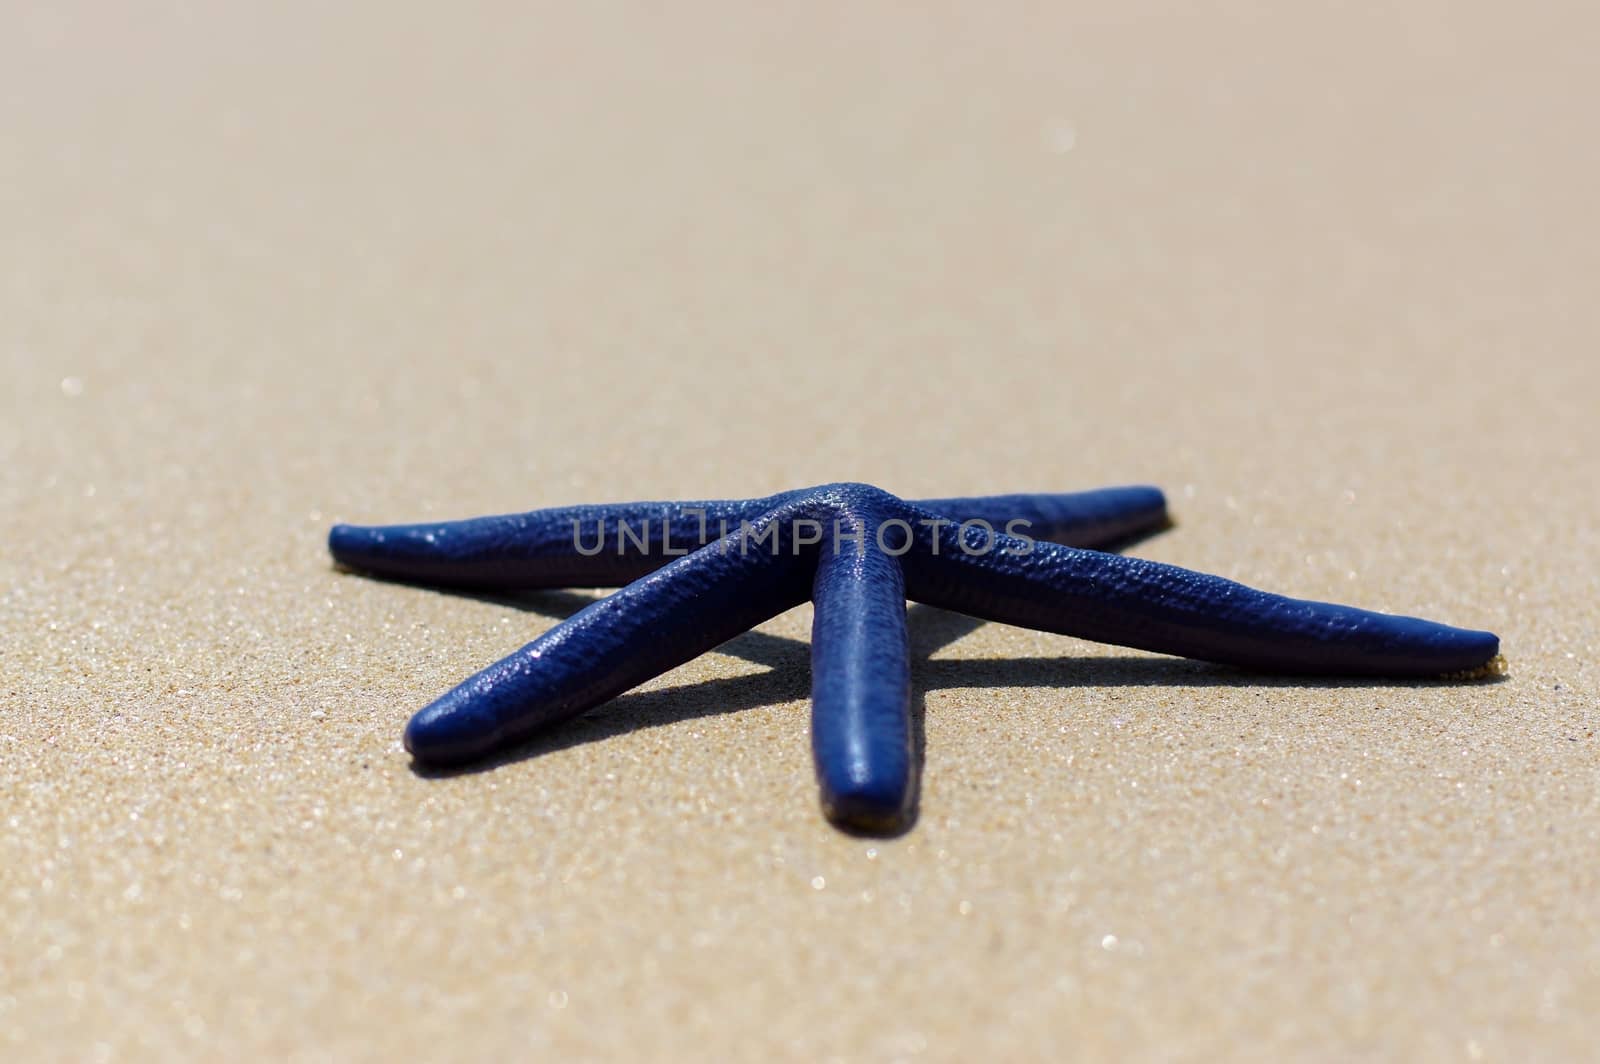 Blue starfish on the white sand in Thailand